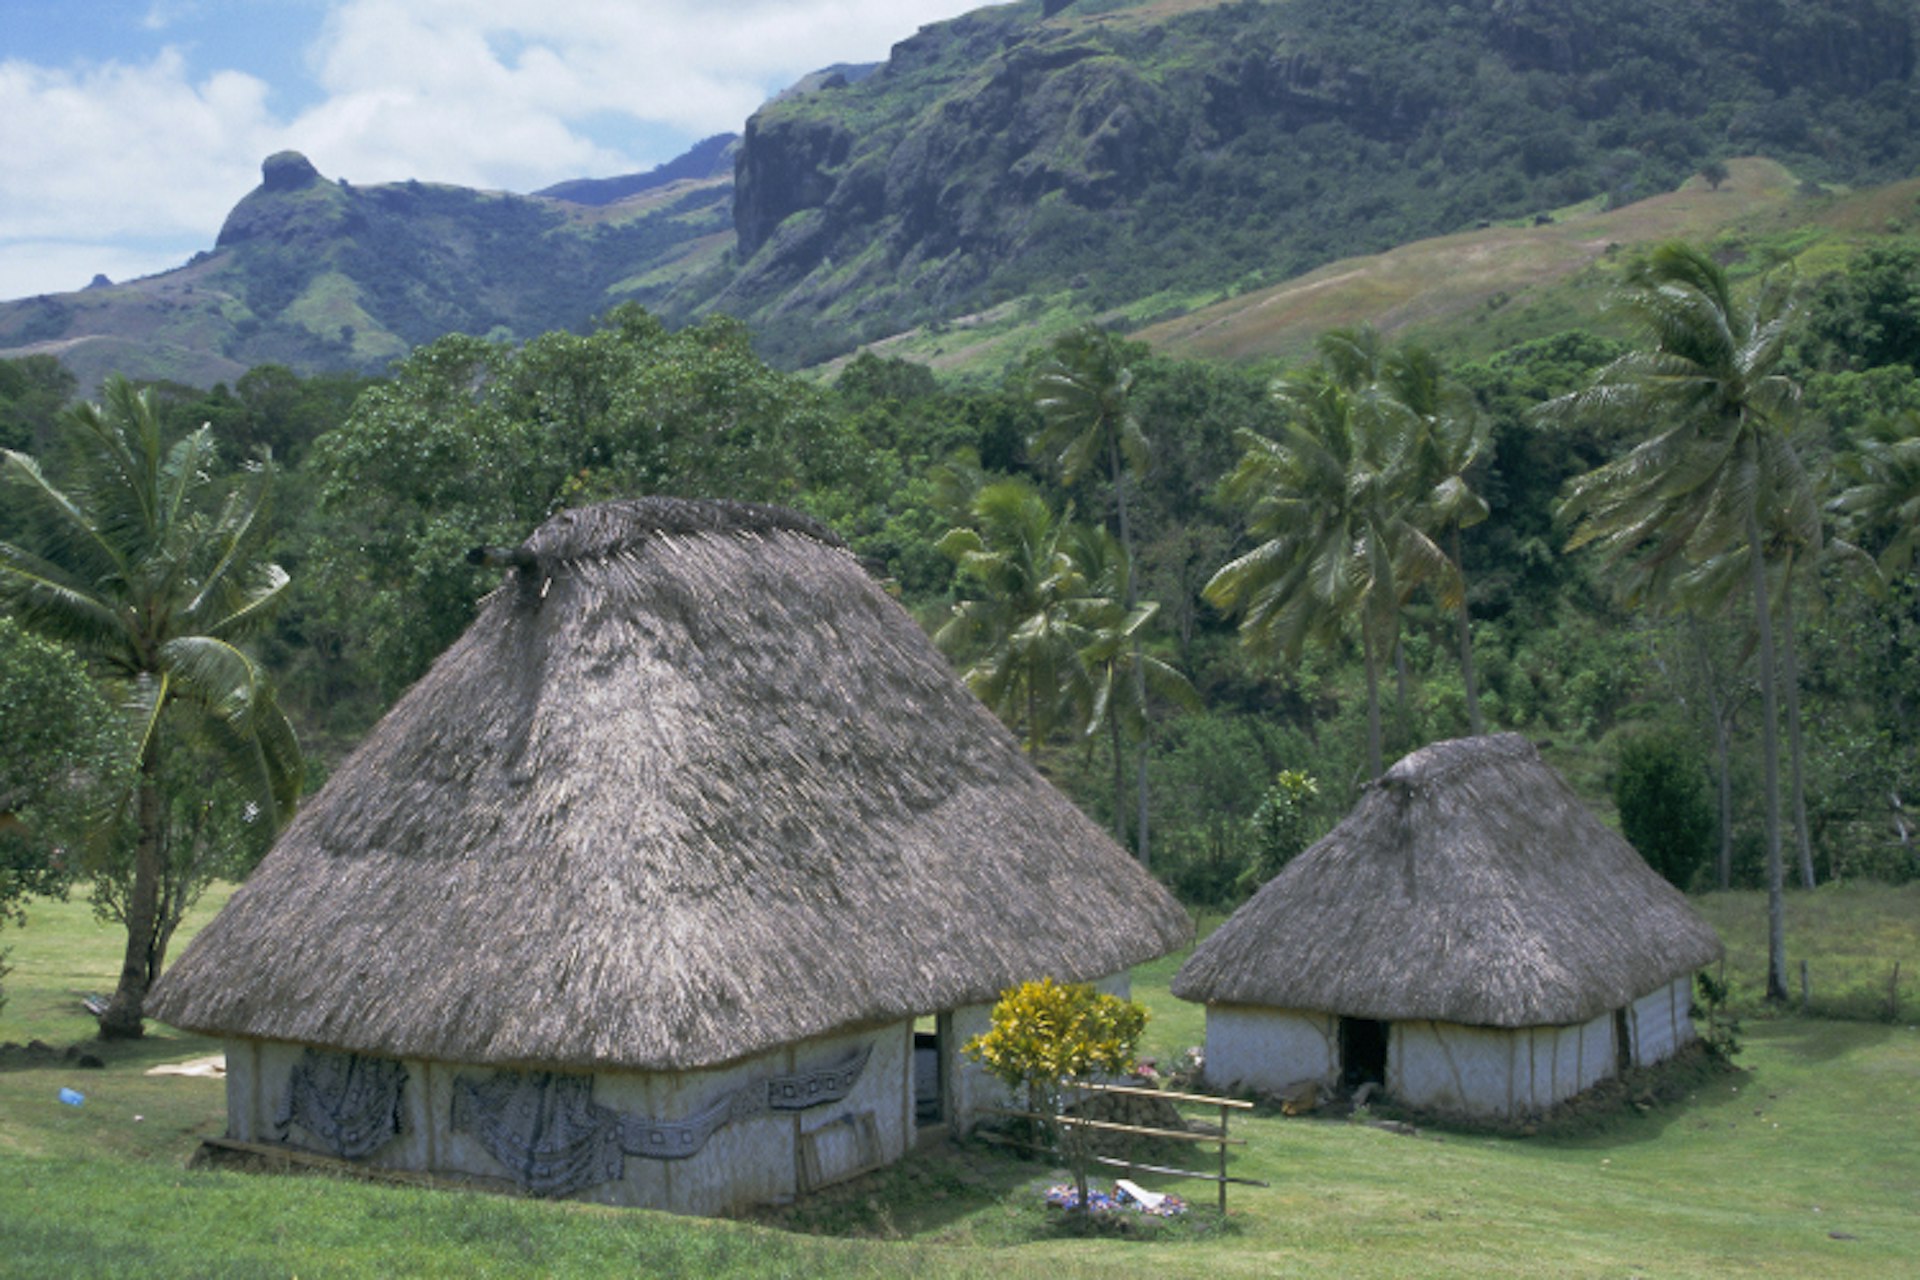 Leave the resorts and spend some time in a traditional Fijian village.  Image by Tony Waltham / Getty Images